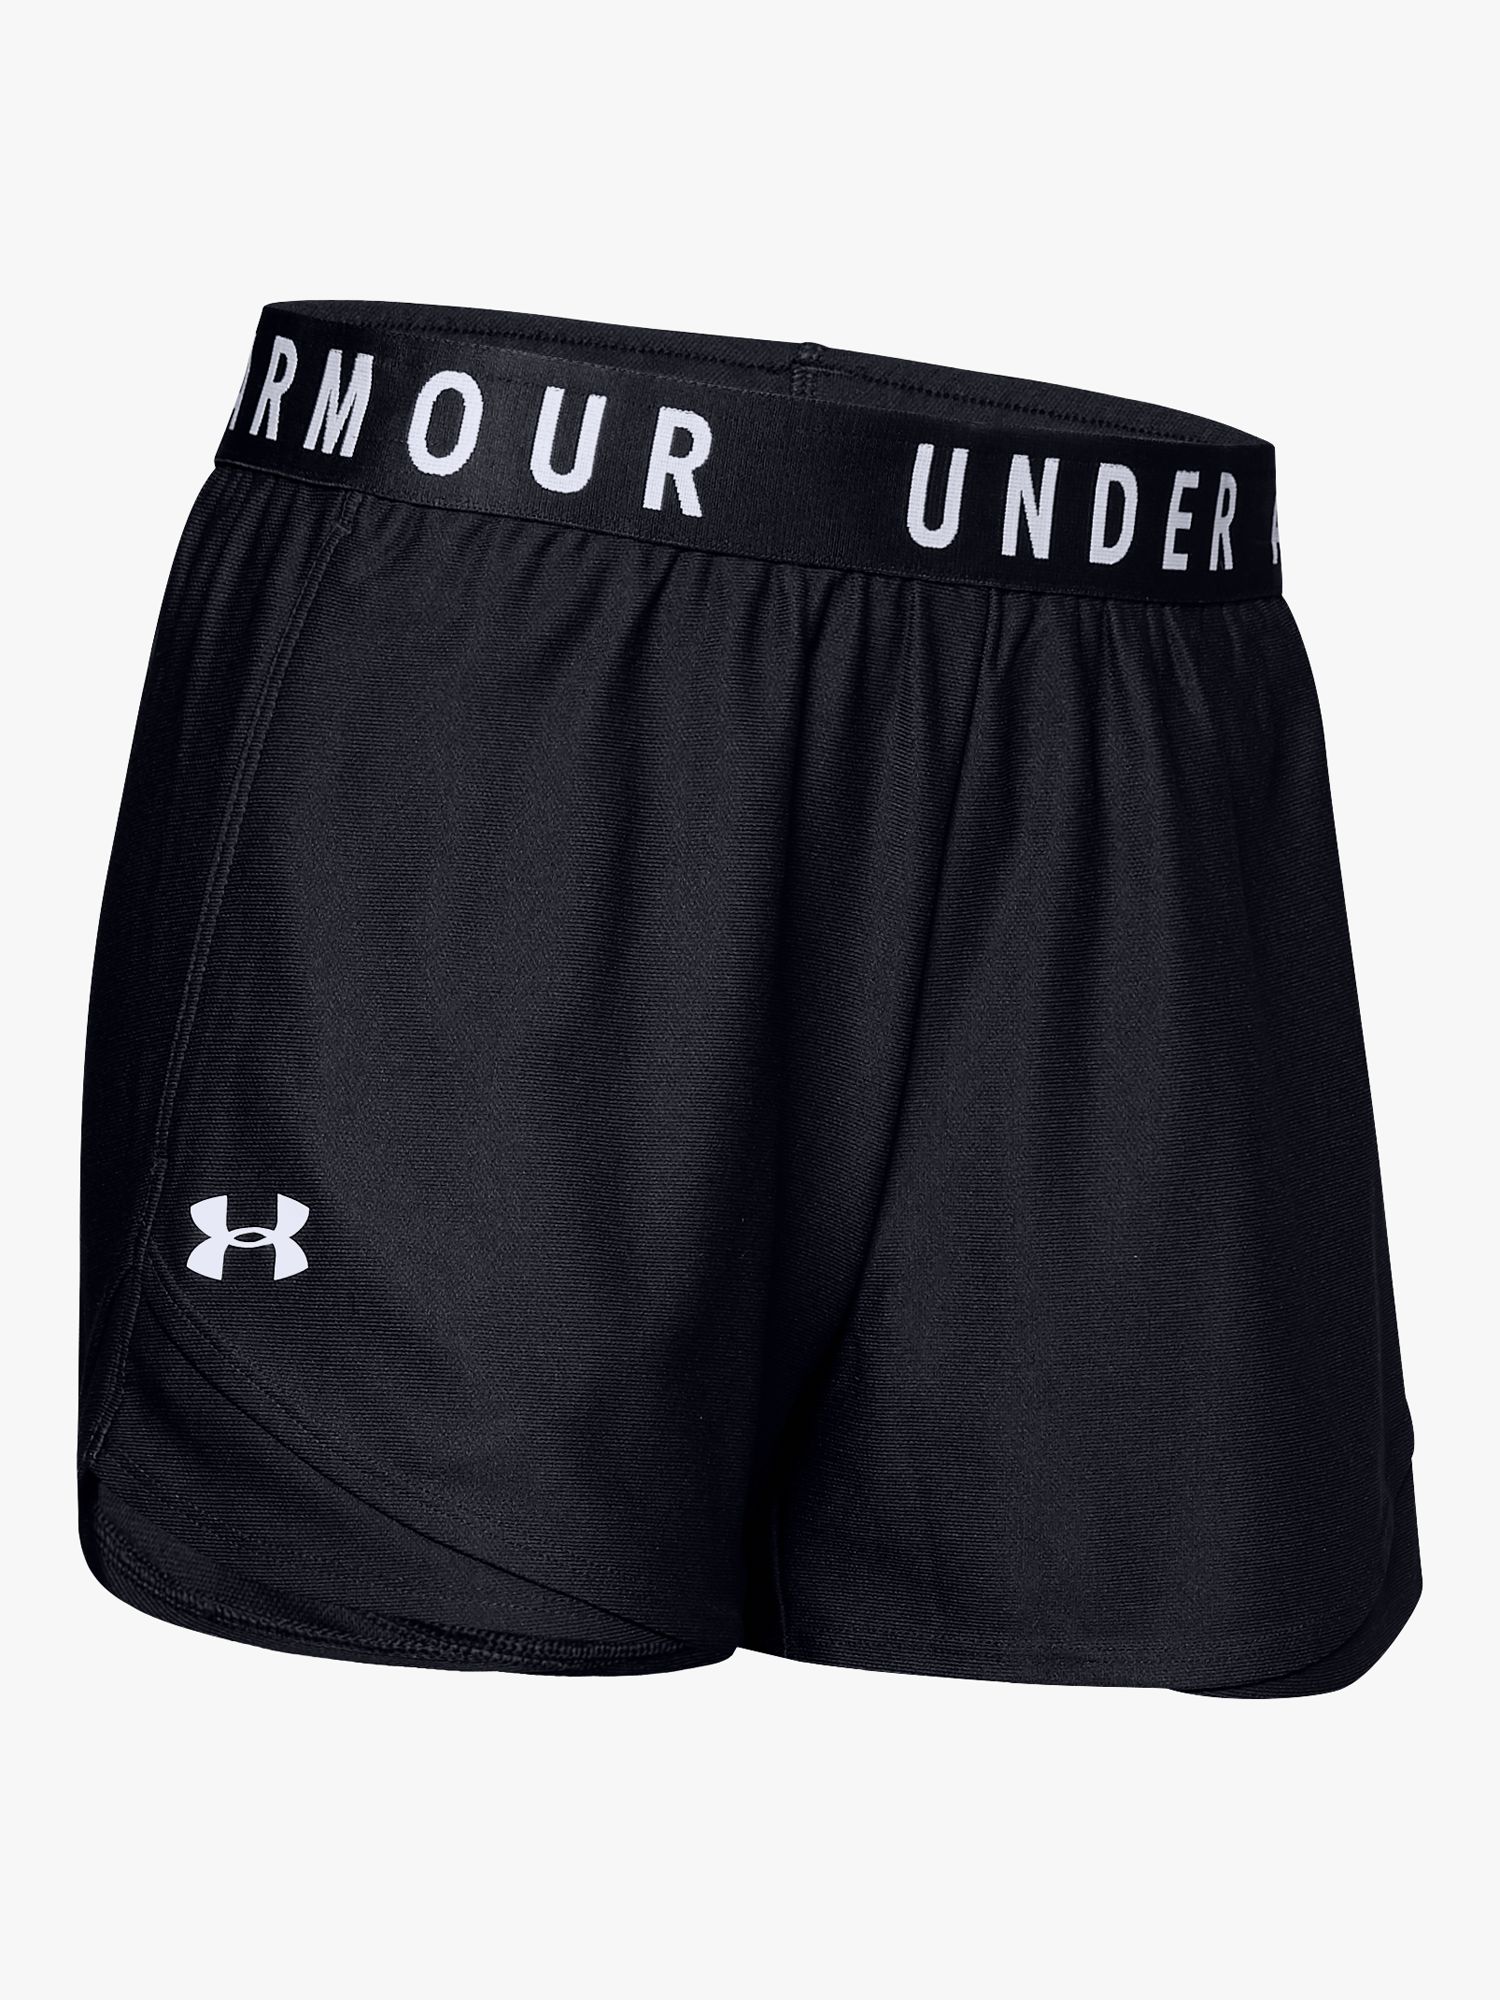 Under Armour Play Up 3.0 Training Shorts, Black/White, XS